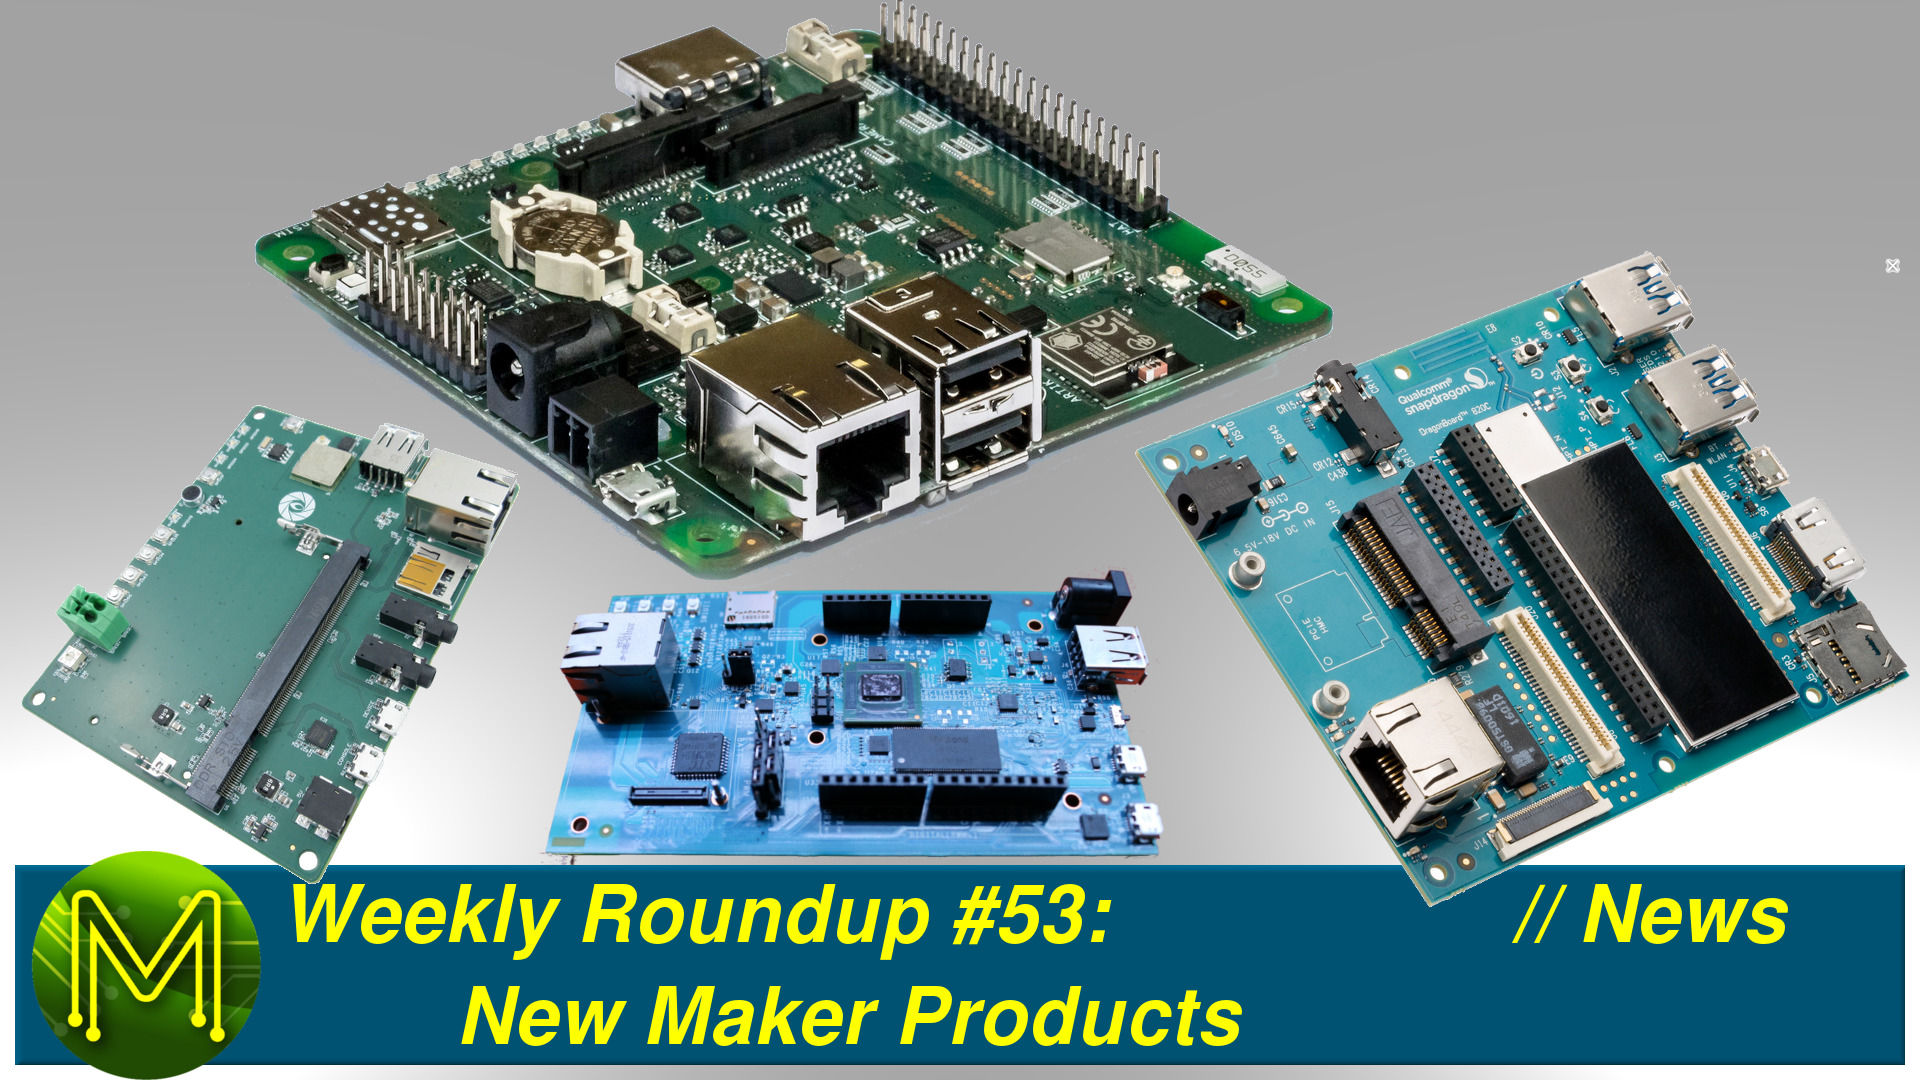 Weekly Roundup #53 - New Maker Products // News